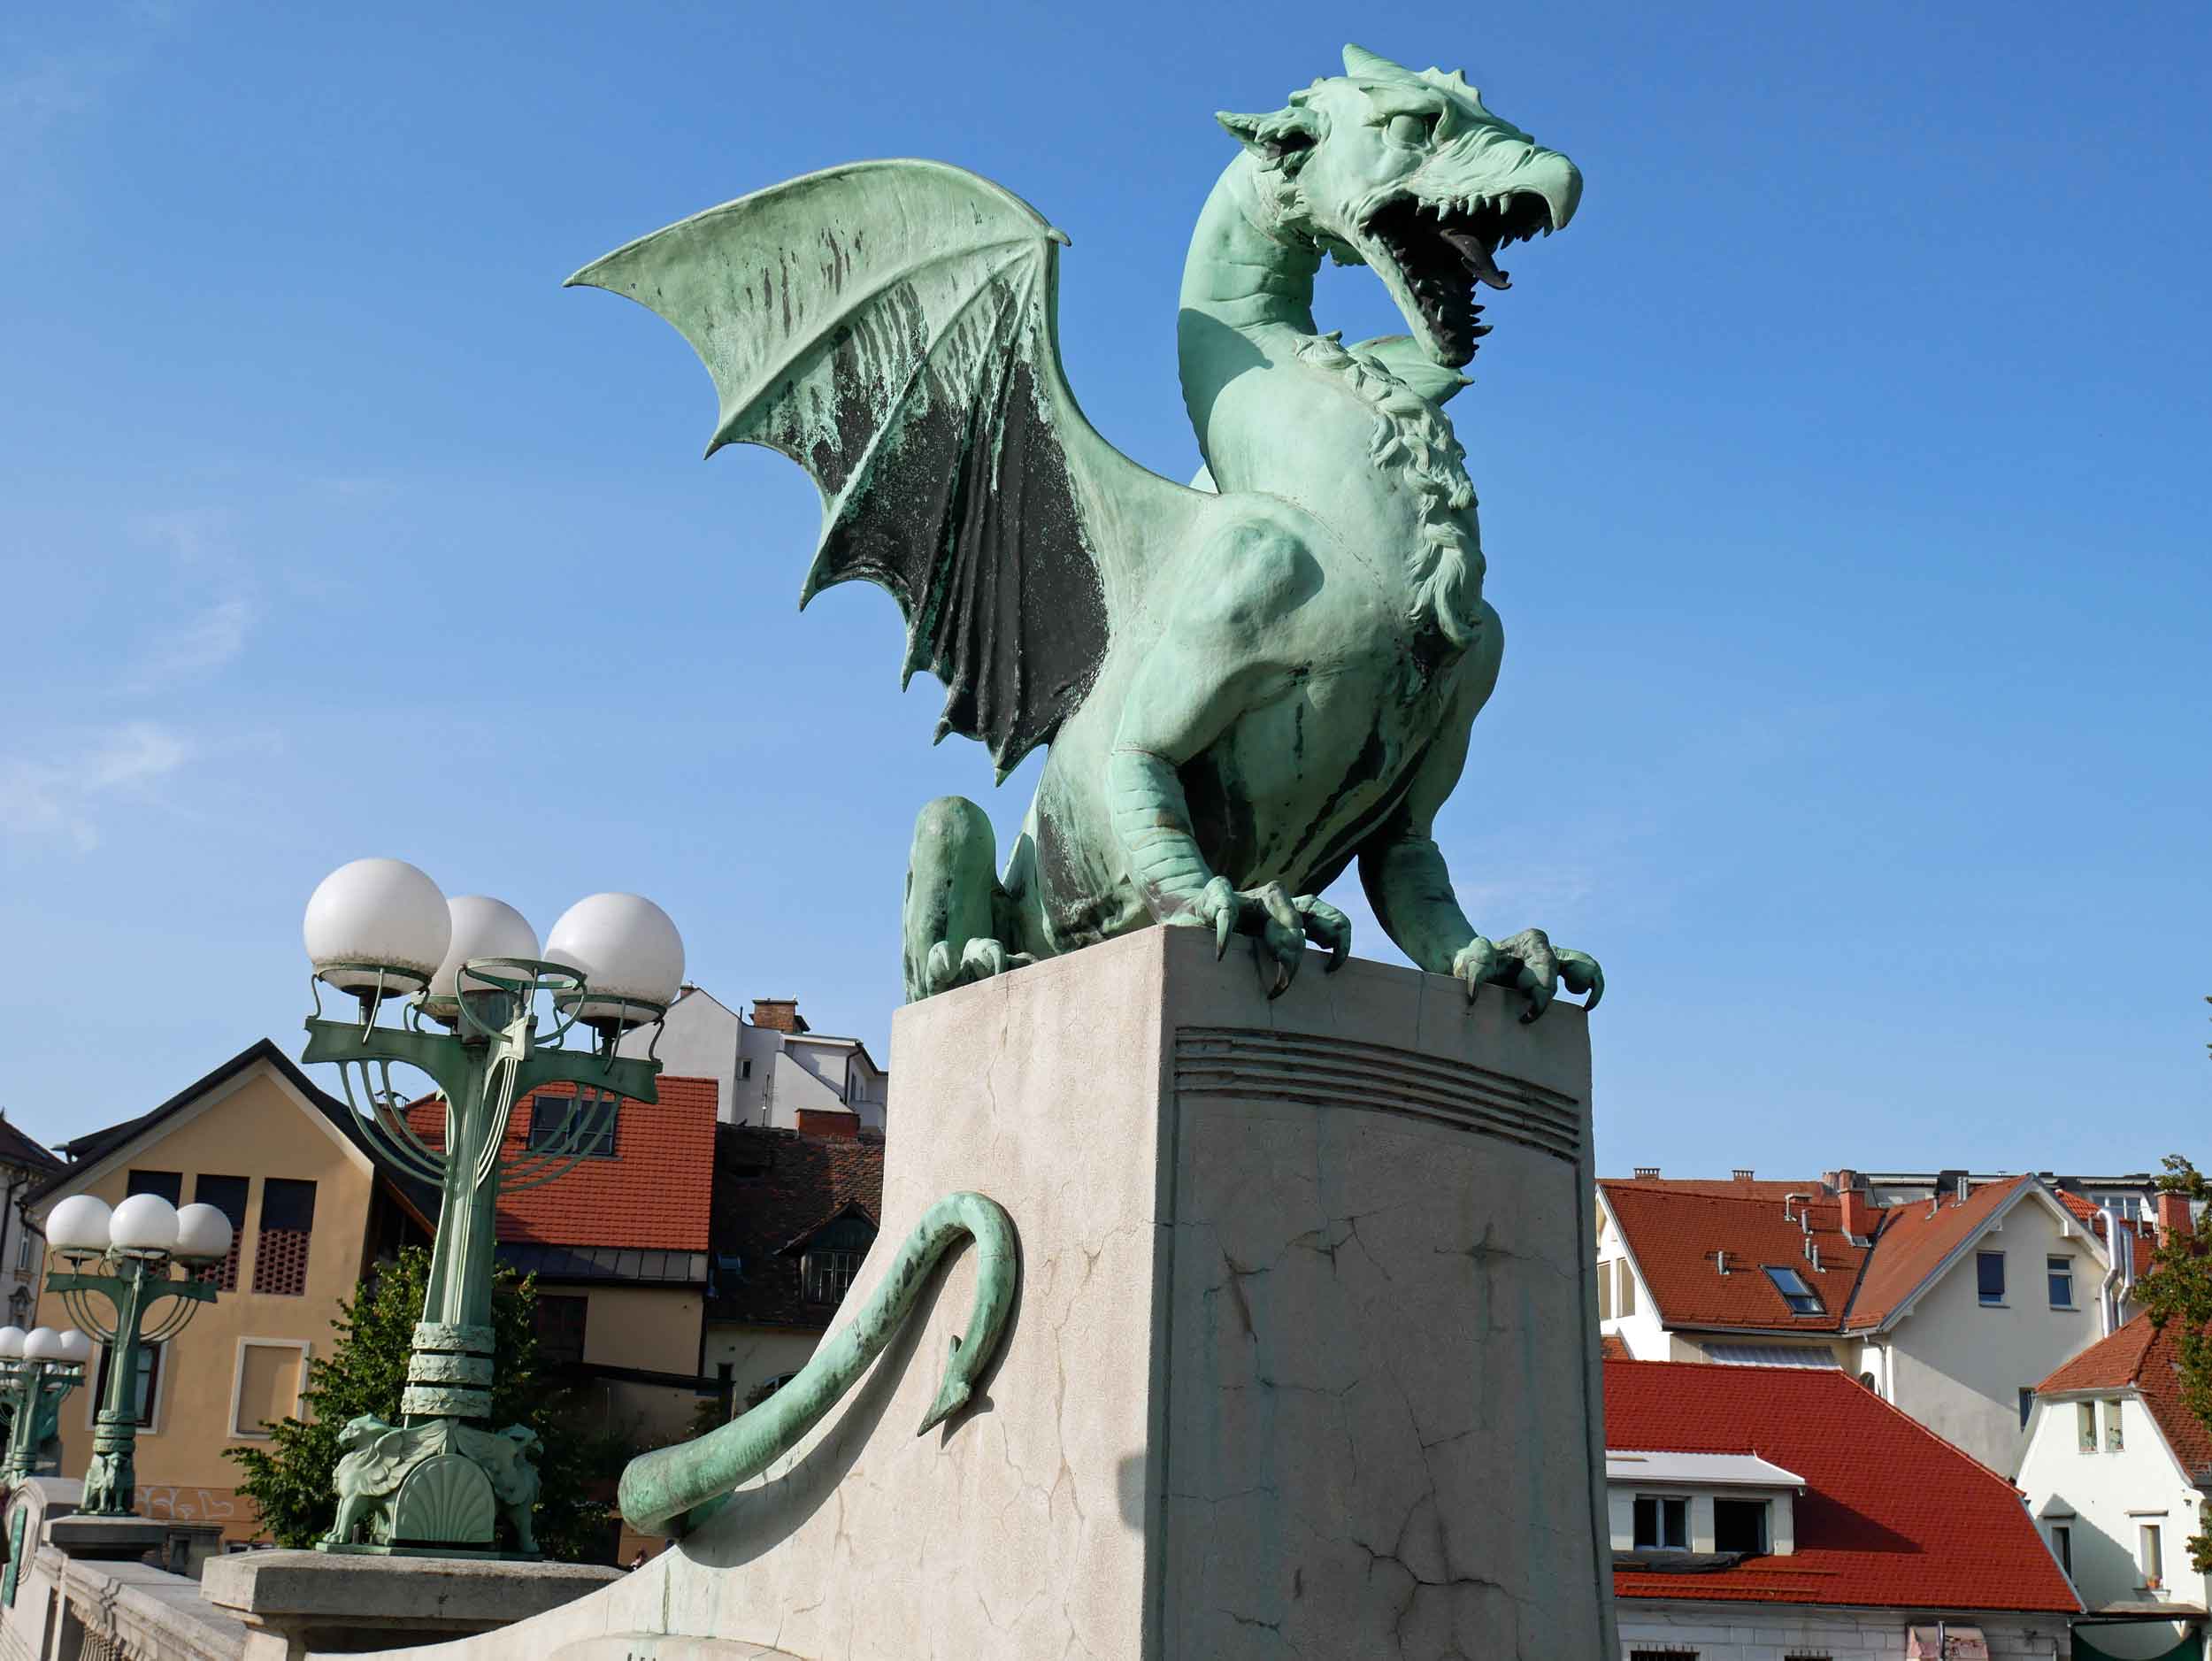  Crossing the Ljubljanica River, the city's stately Dragon Bridge was built in the early 1900s when Ljubljana was still ruled by the Austro-Hungarian monarchy.&nbsp; 